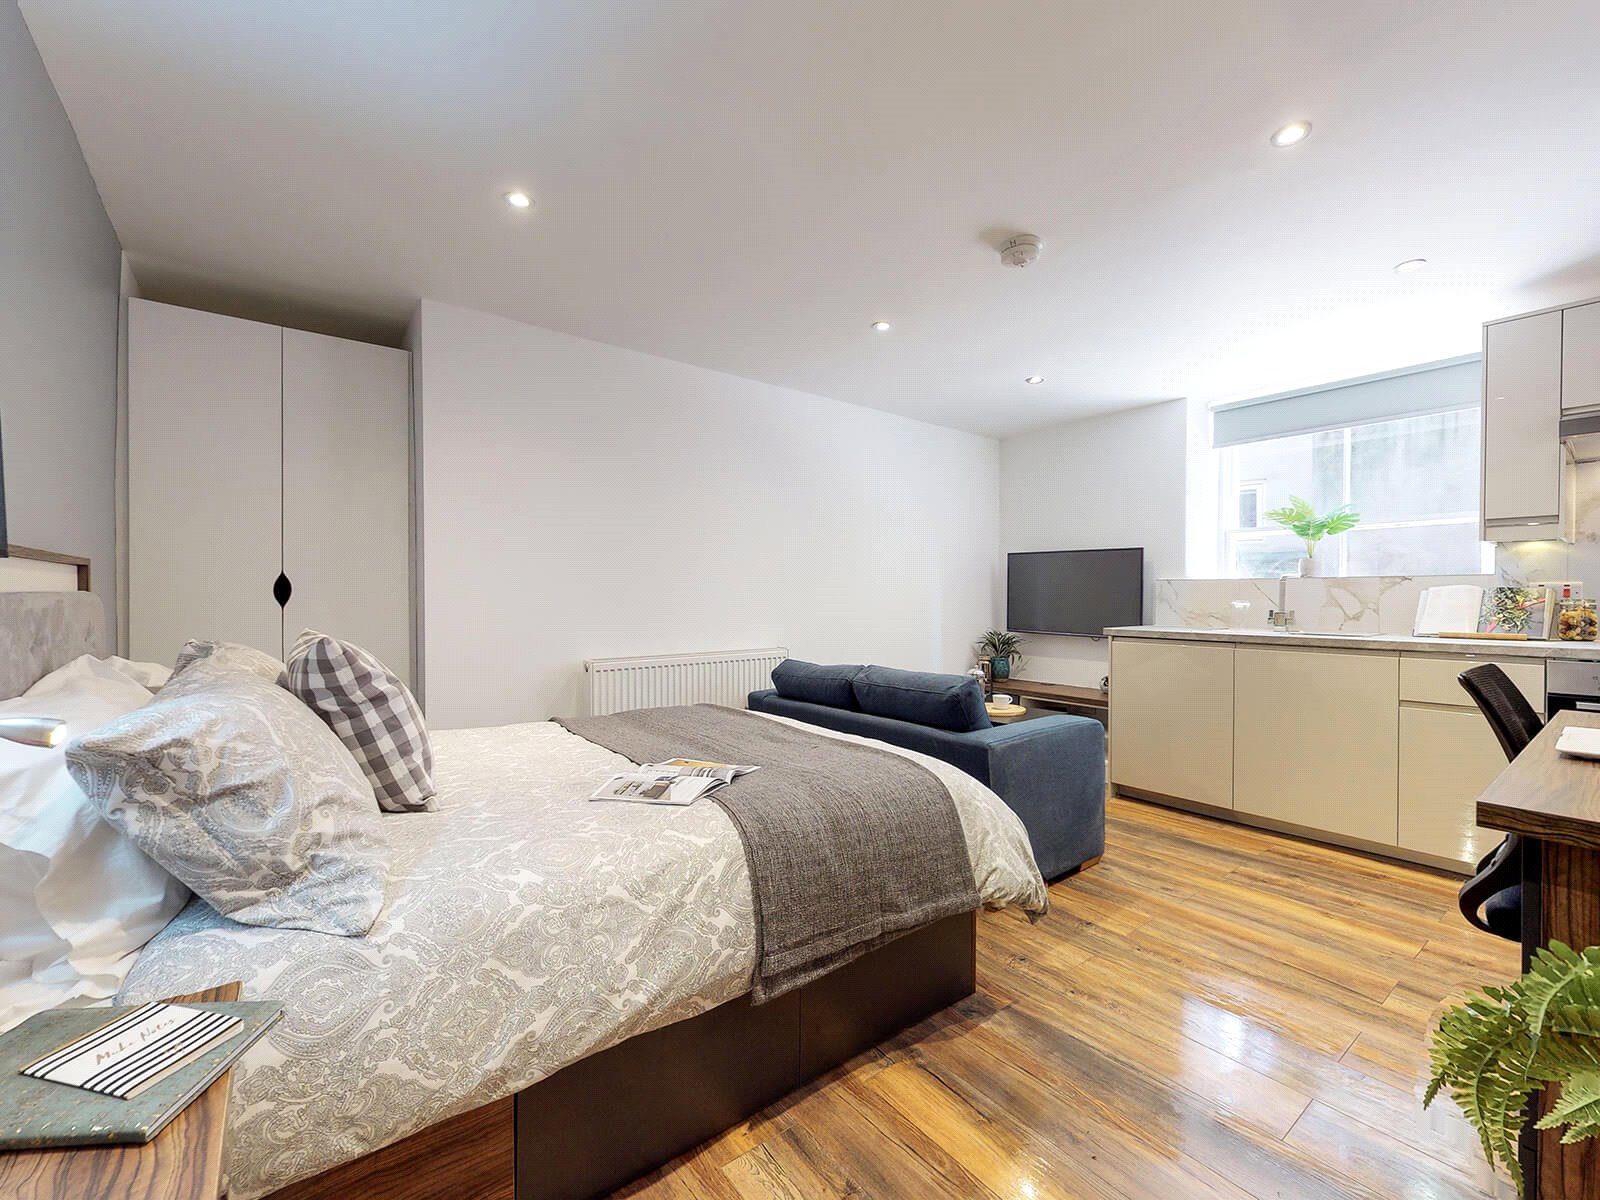 0 bed apartment for rent in Leeds. From YPP - Leeds